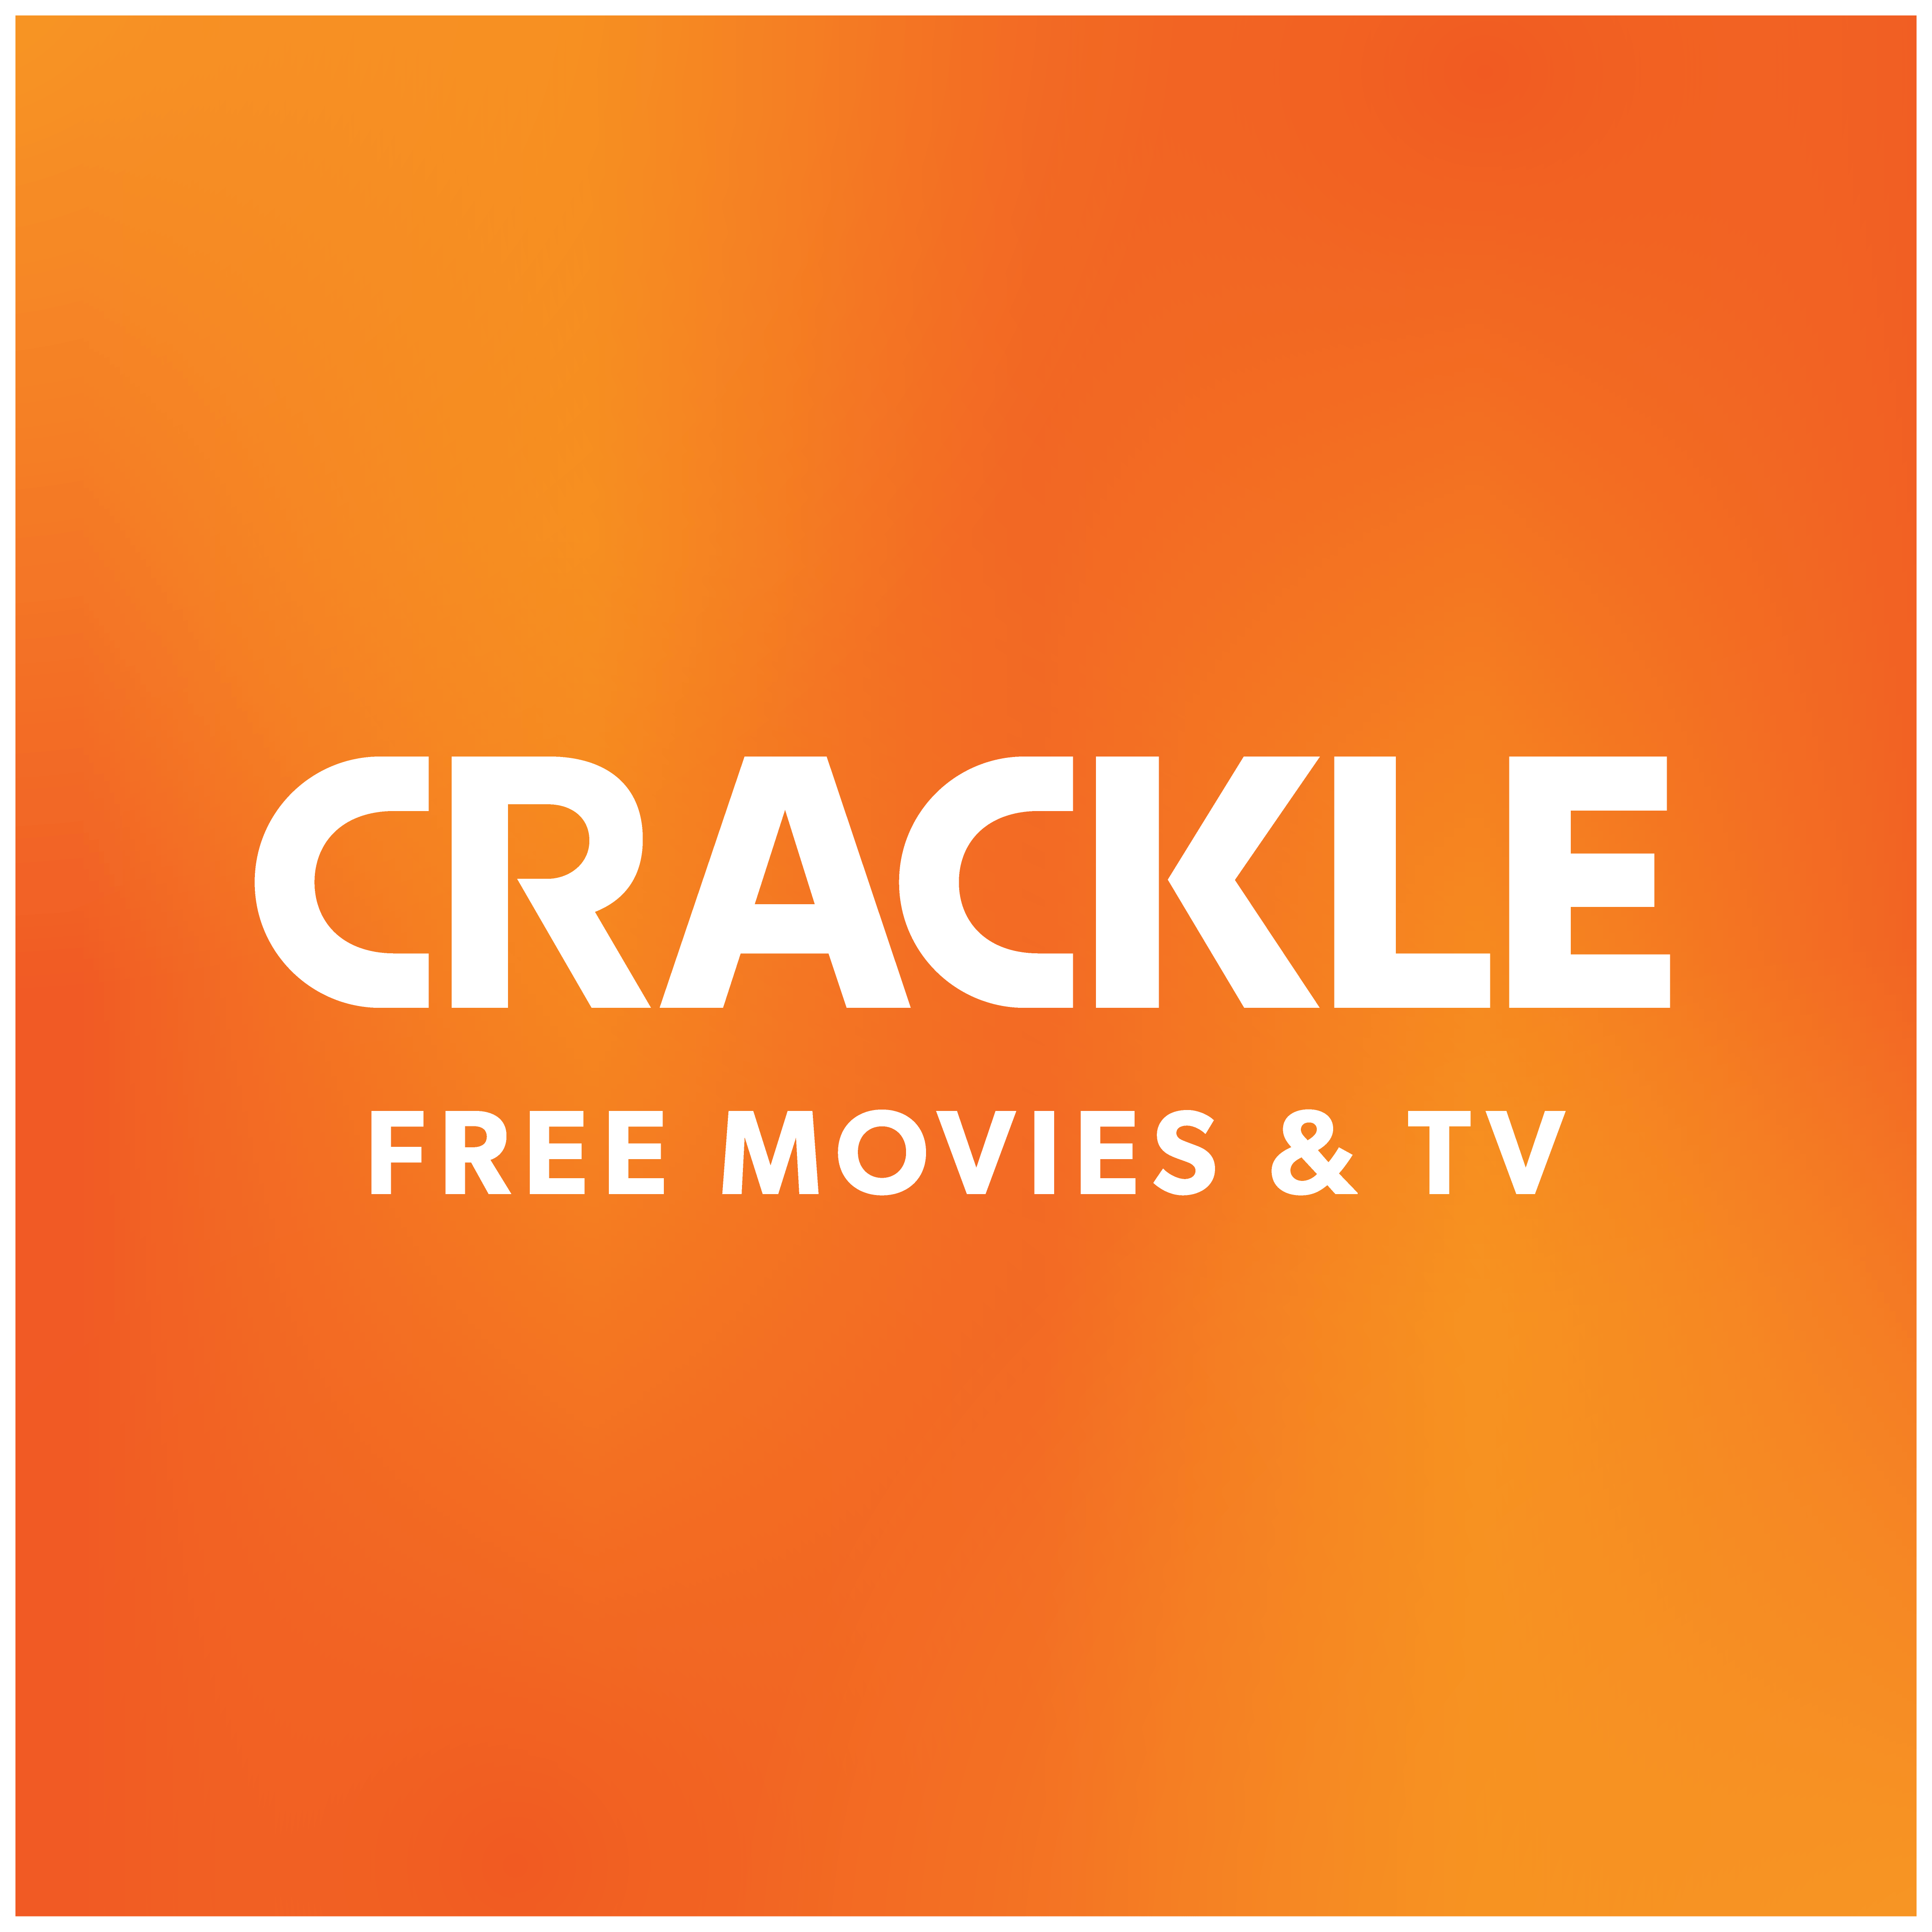 Crackle Will Stream For Free The Roger Corman Universe of Movies